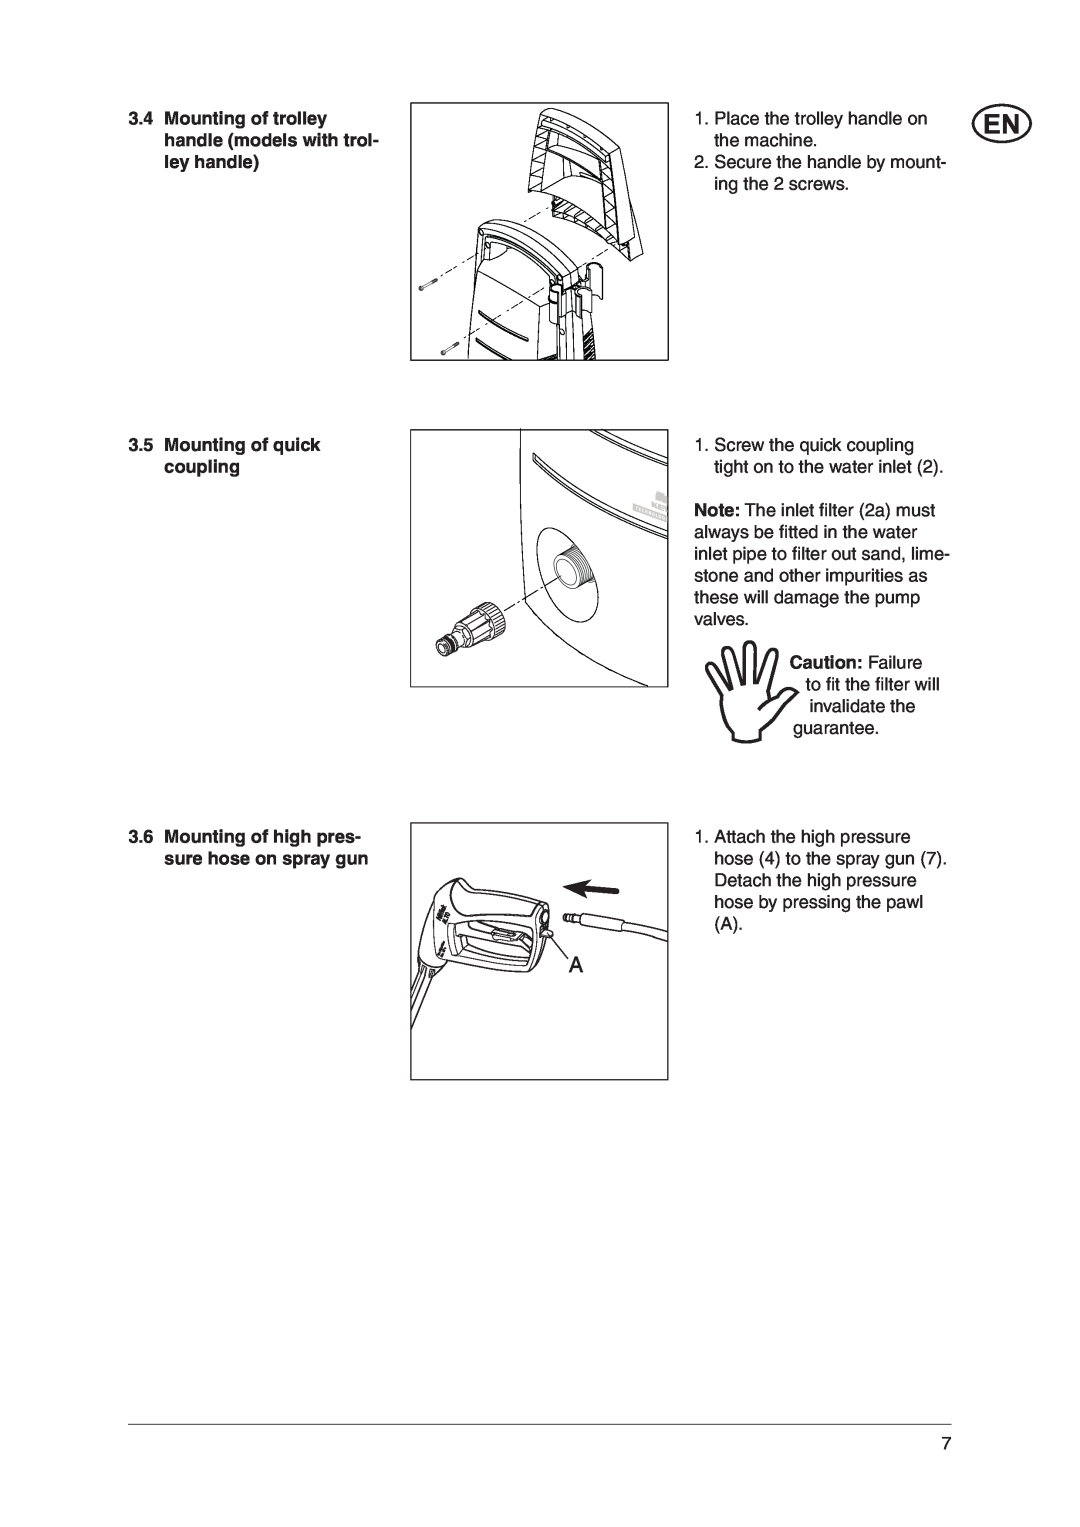 Nilfisk-ALTO C 110.2 X-TRA user manual 3.5Mounting of quick coupling, 3.6Mounting of high pres- sure hose on spray gun 